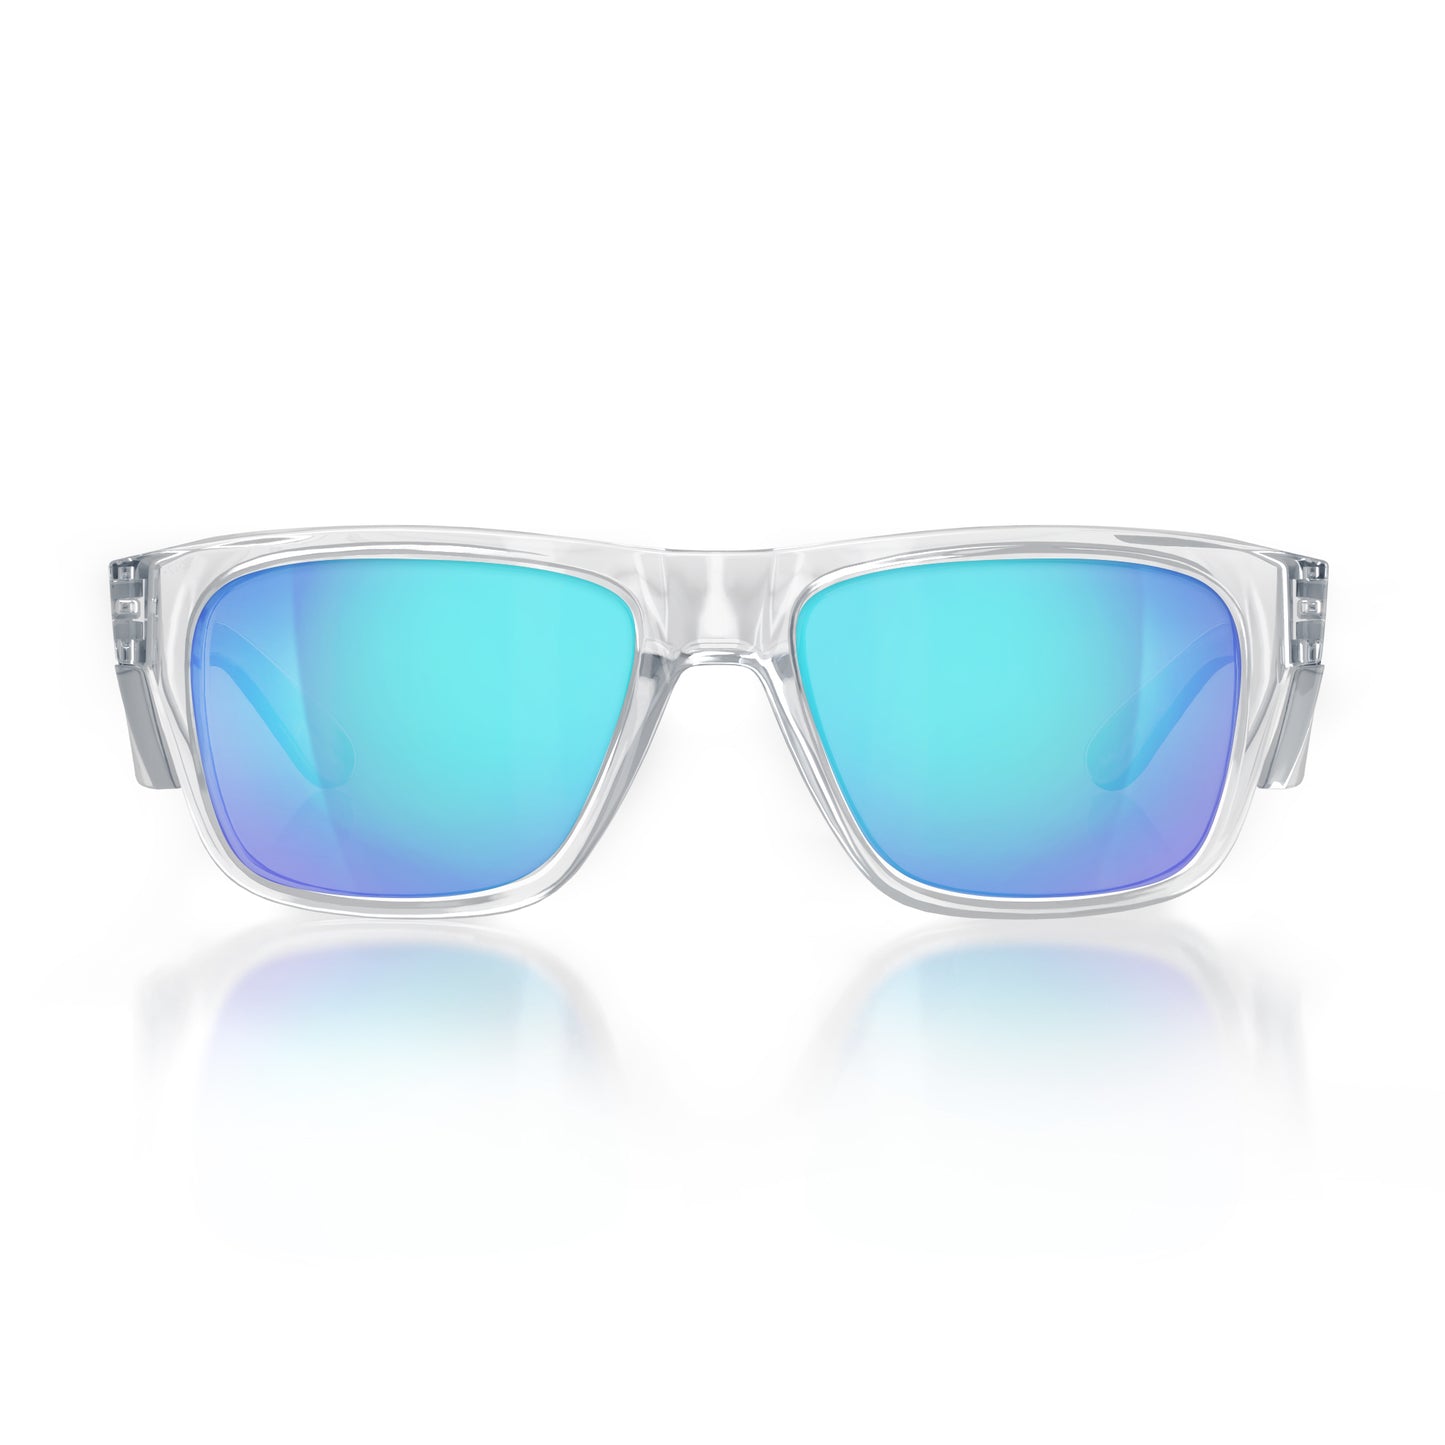 SafeStyle Fusions Clear Frame/Mirror Blue Polarised UV400